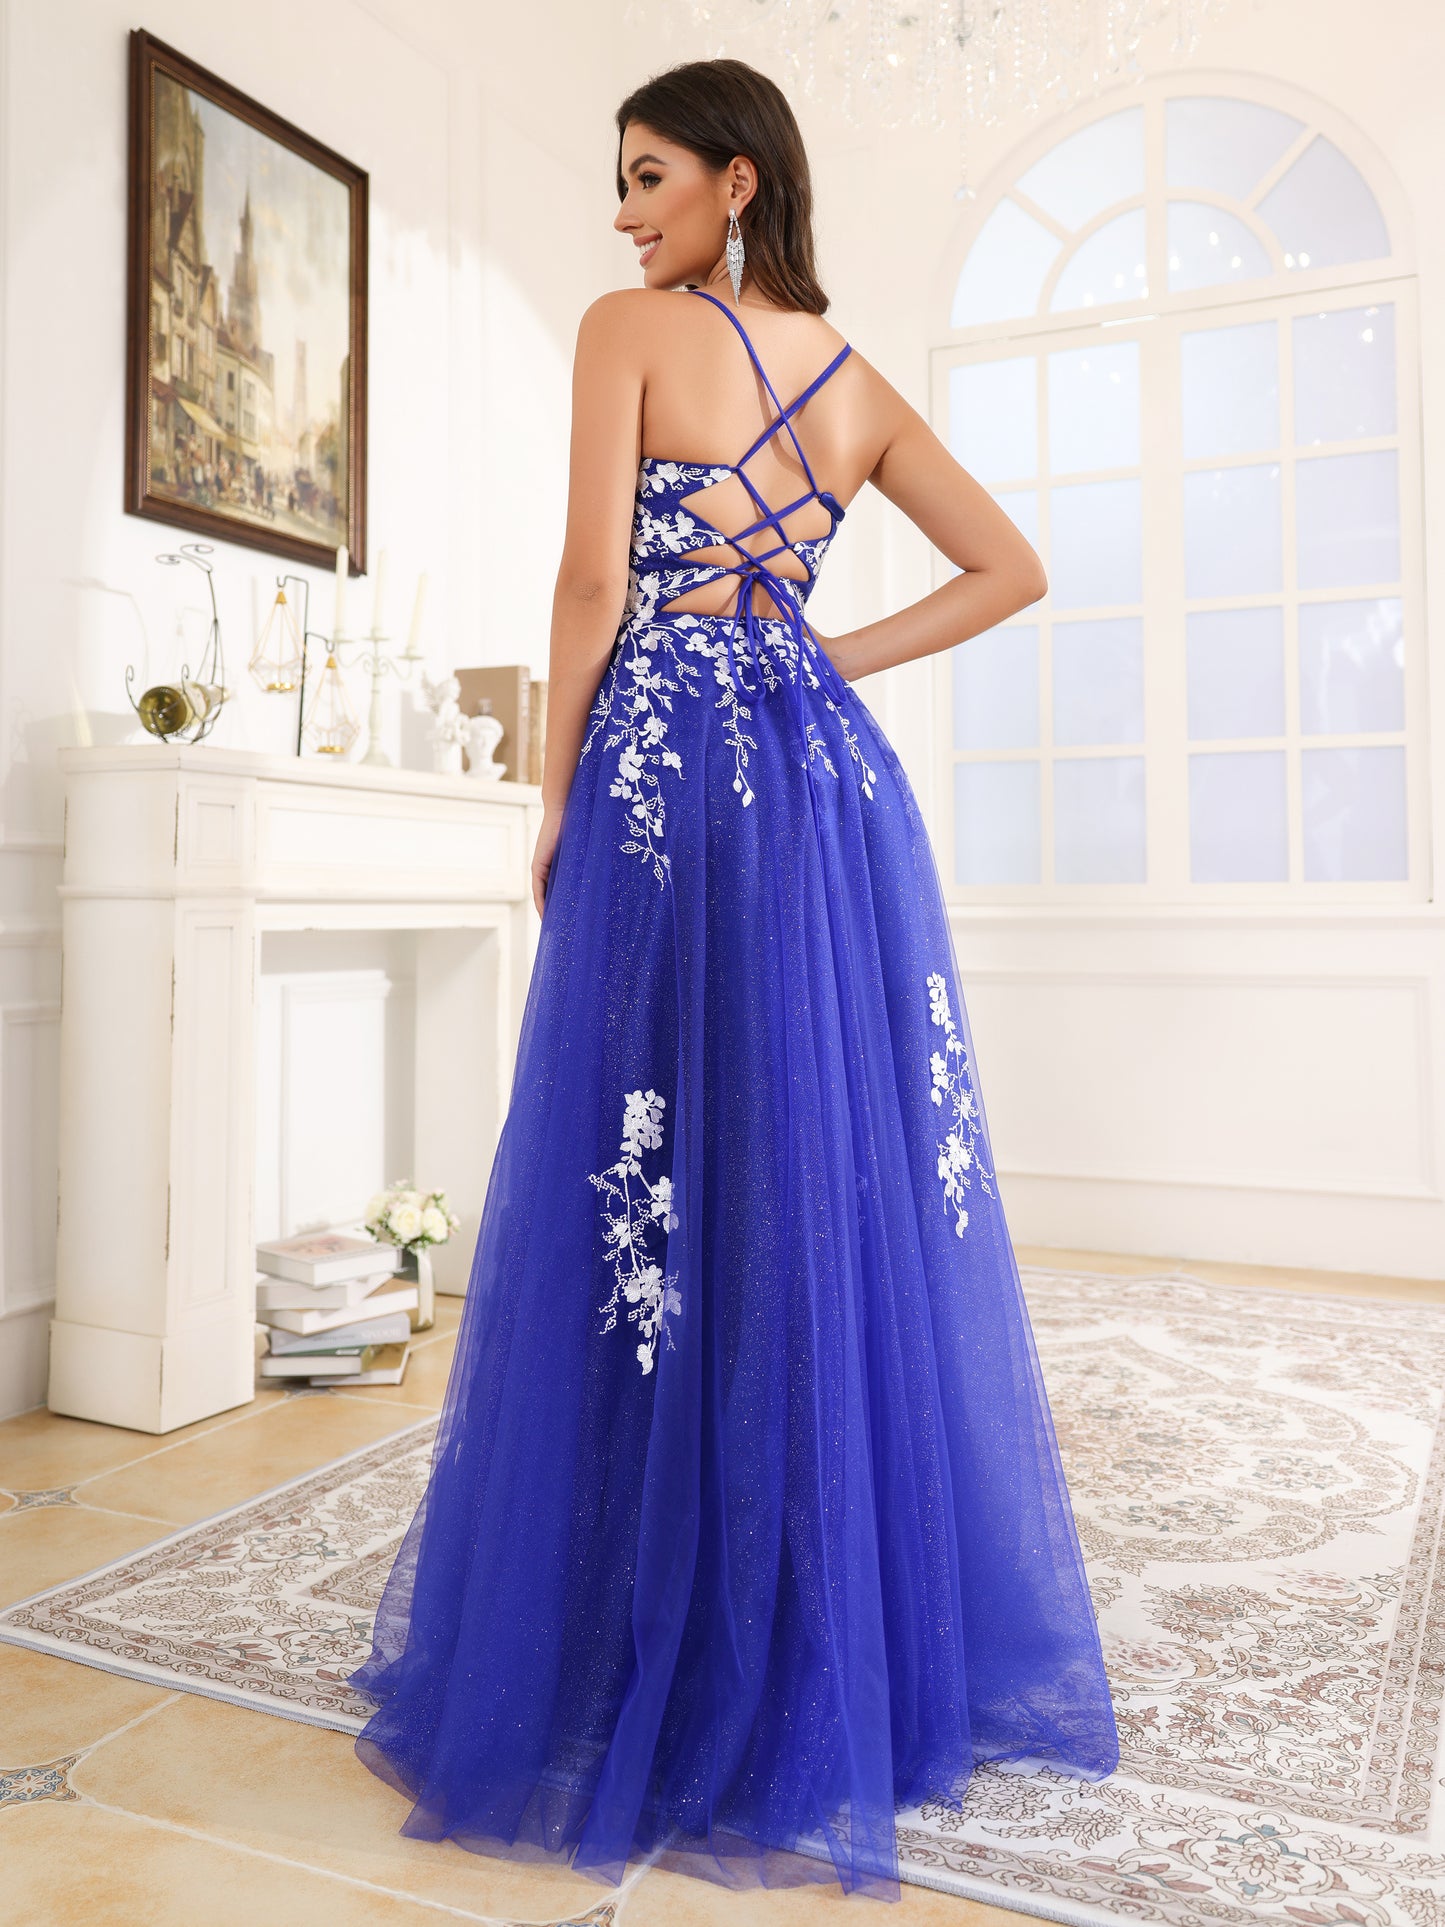 Spaghetti Straps Lace Appliques Floor Length Tulle Prom Dress